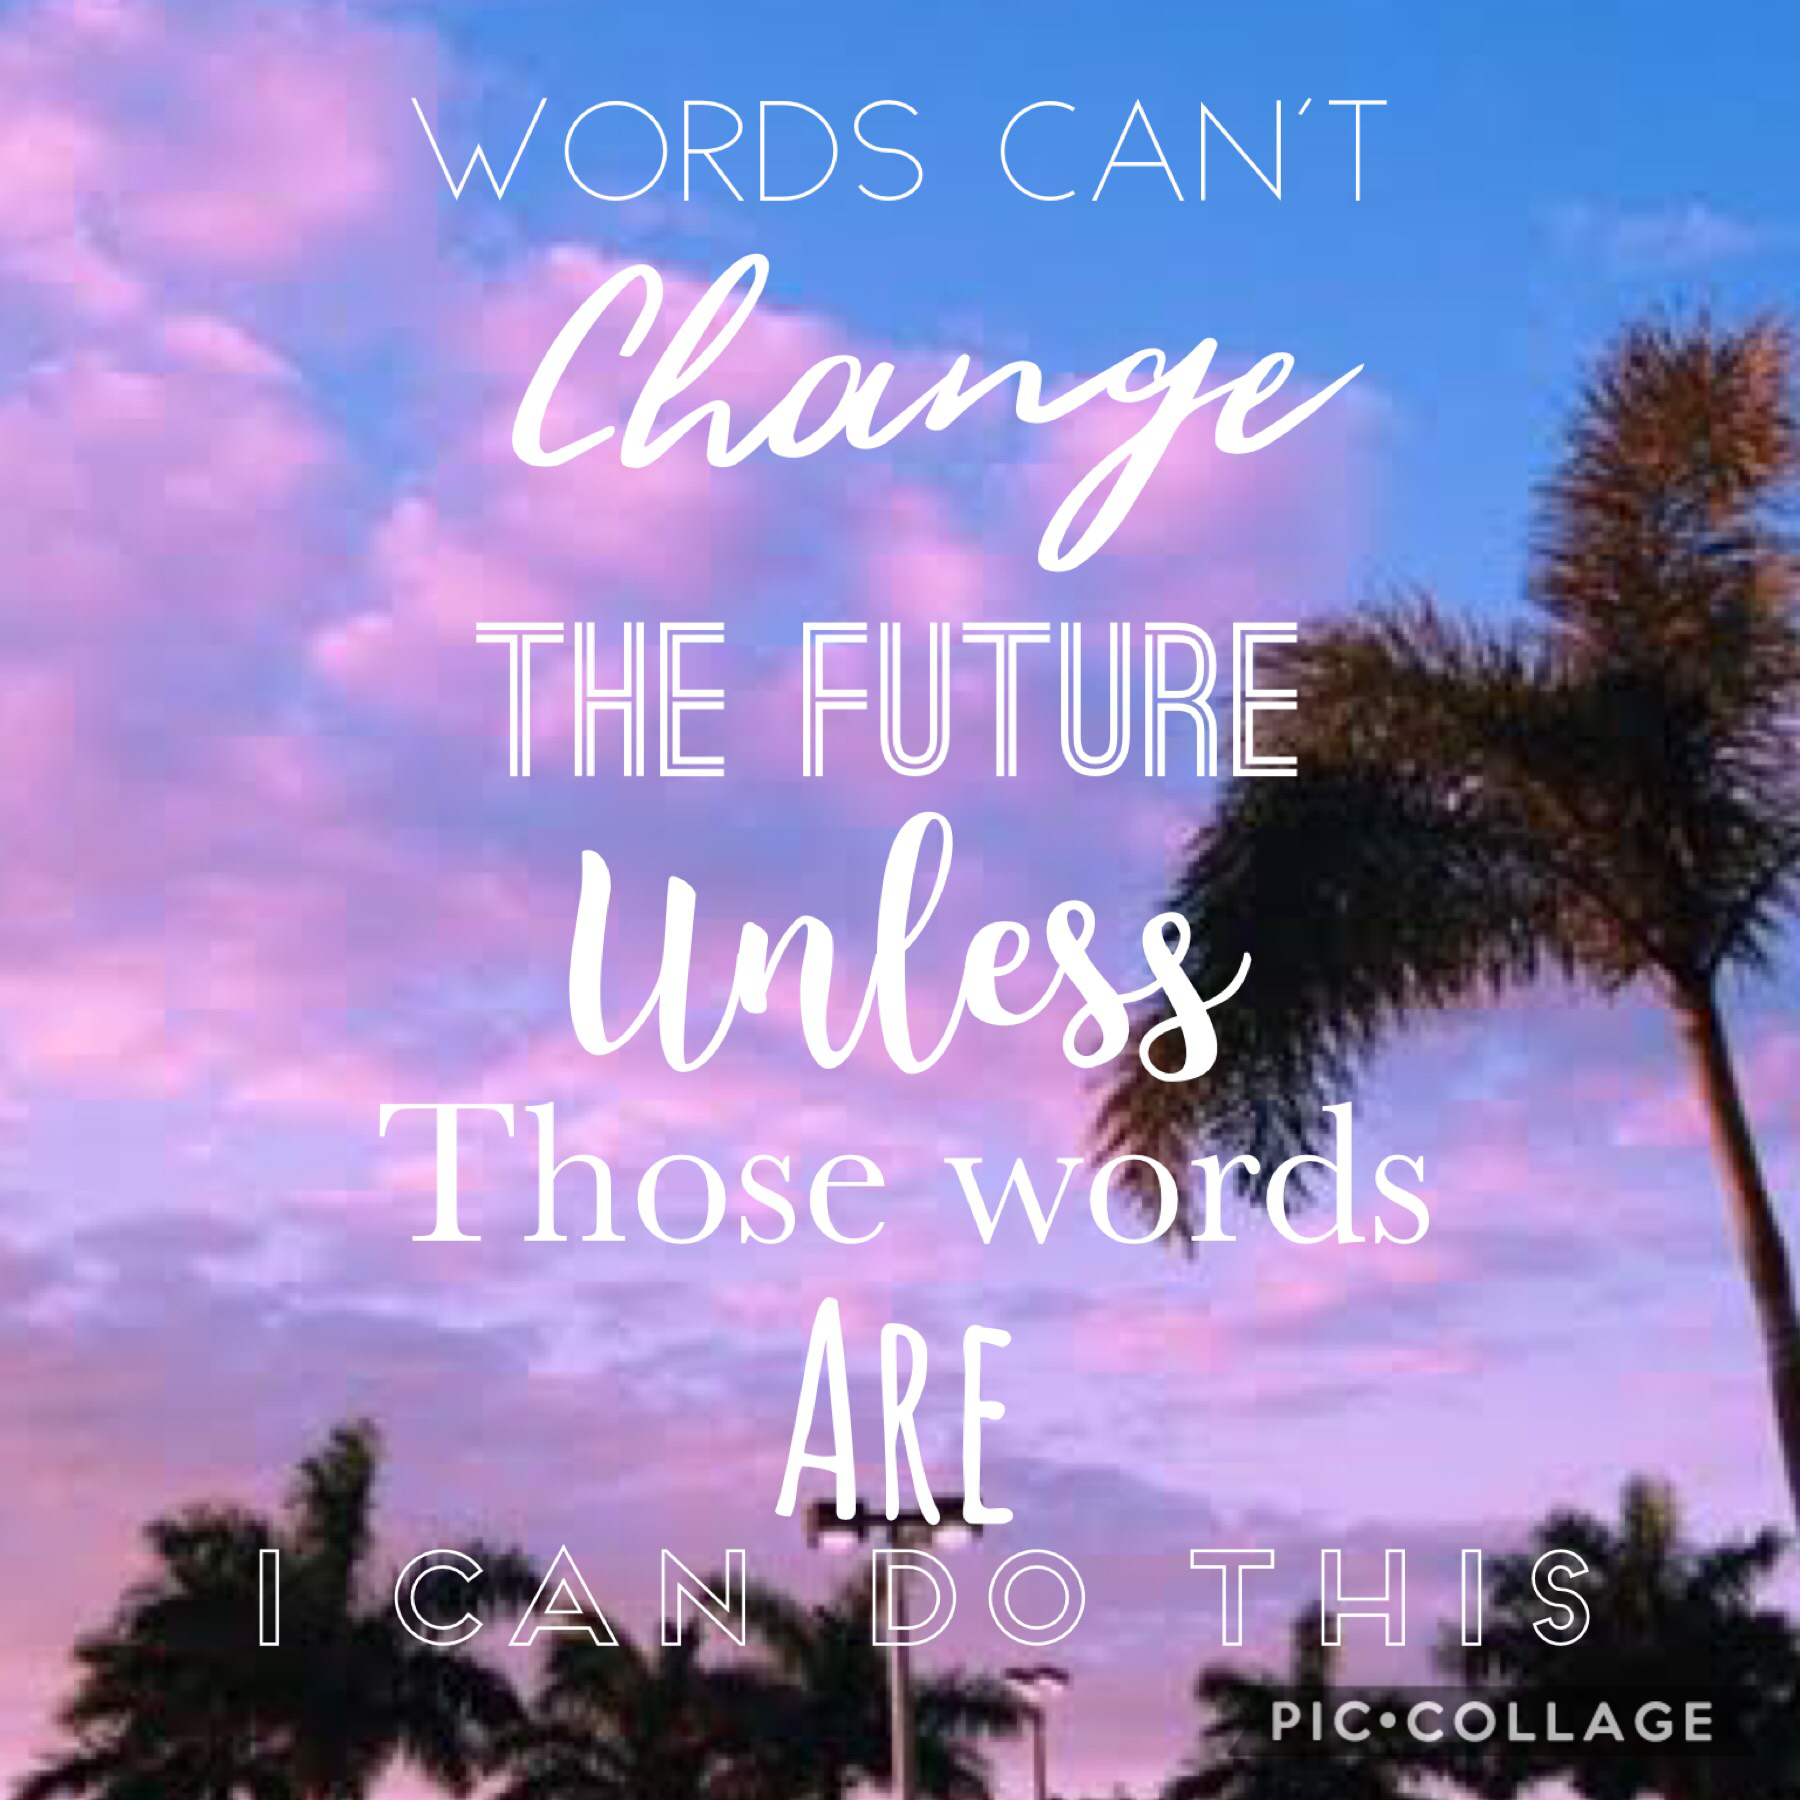 Words can't change the future unless those words are I can do this ❤️❤️❤️